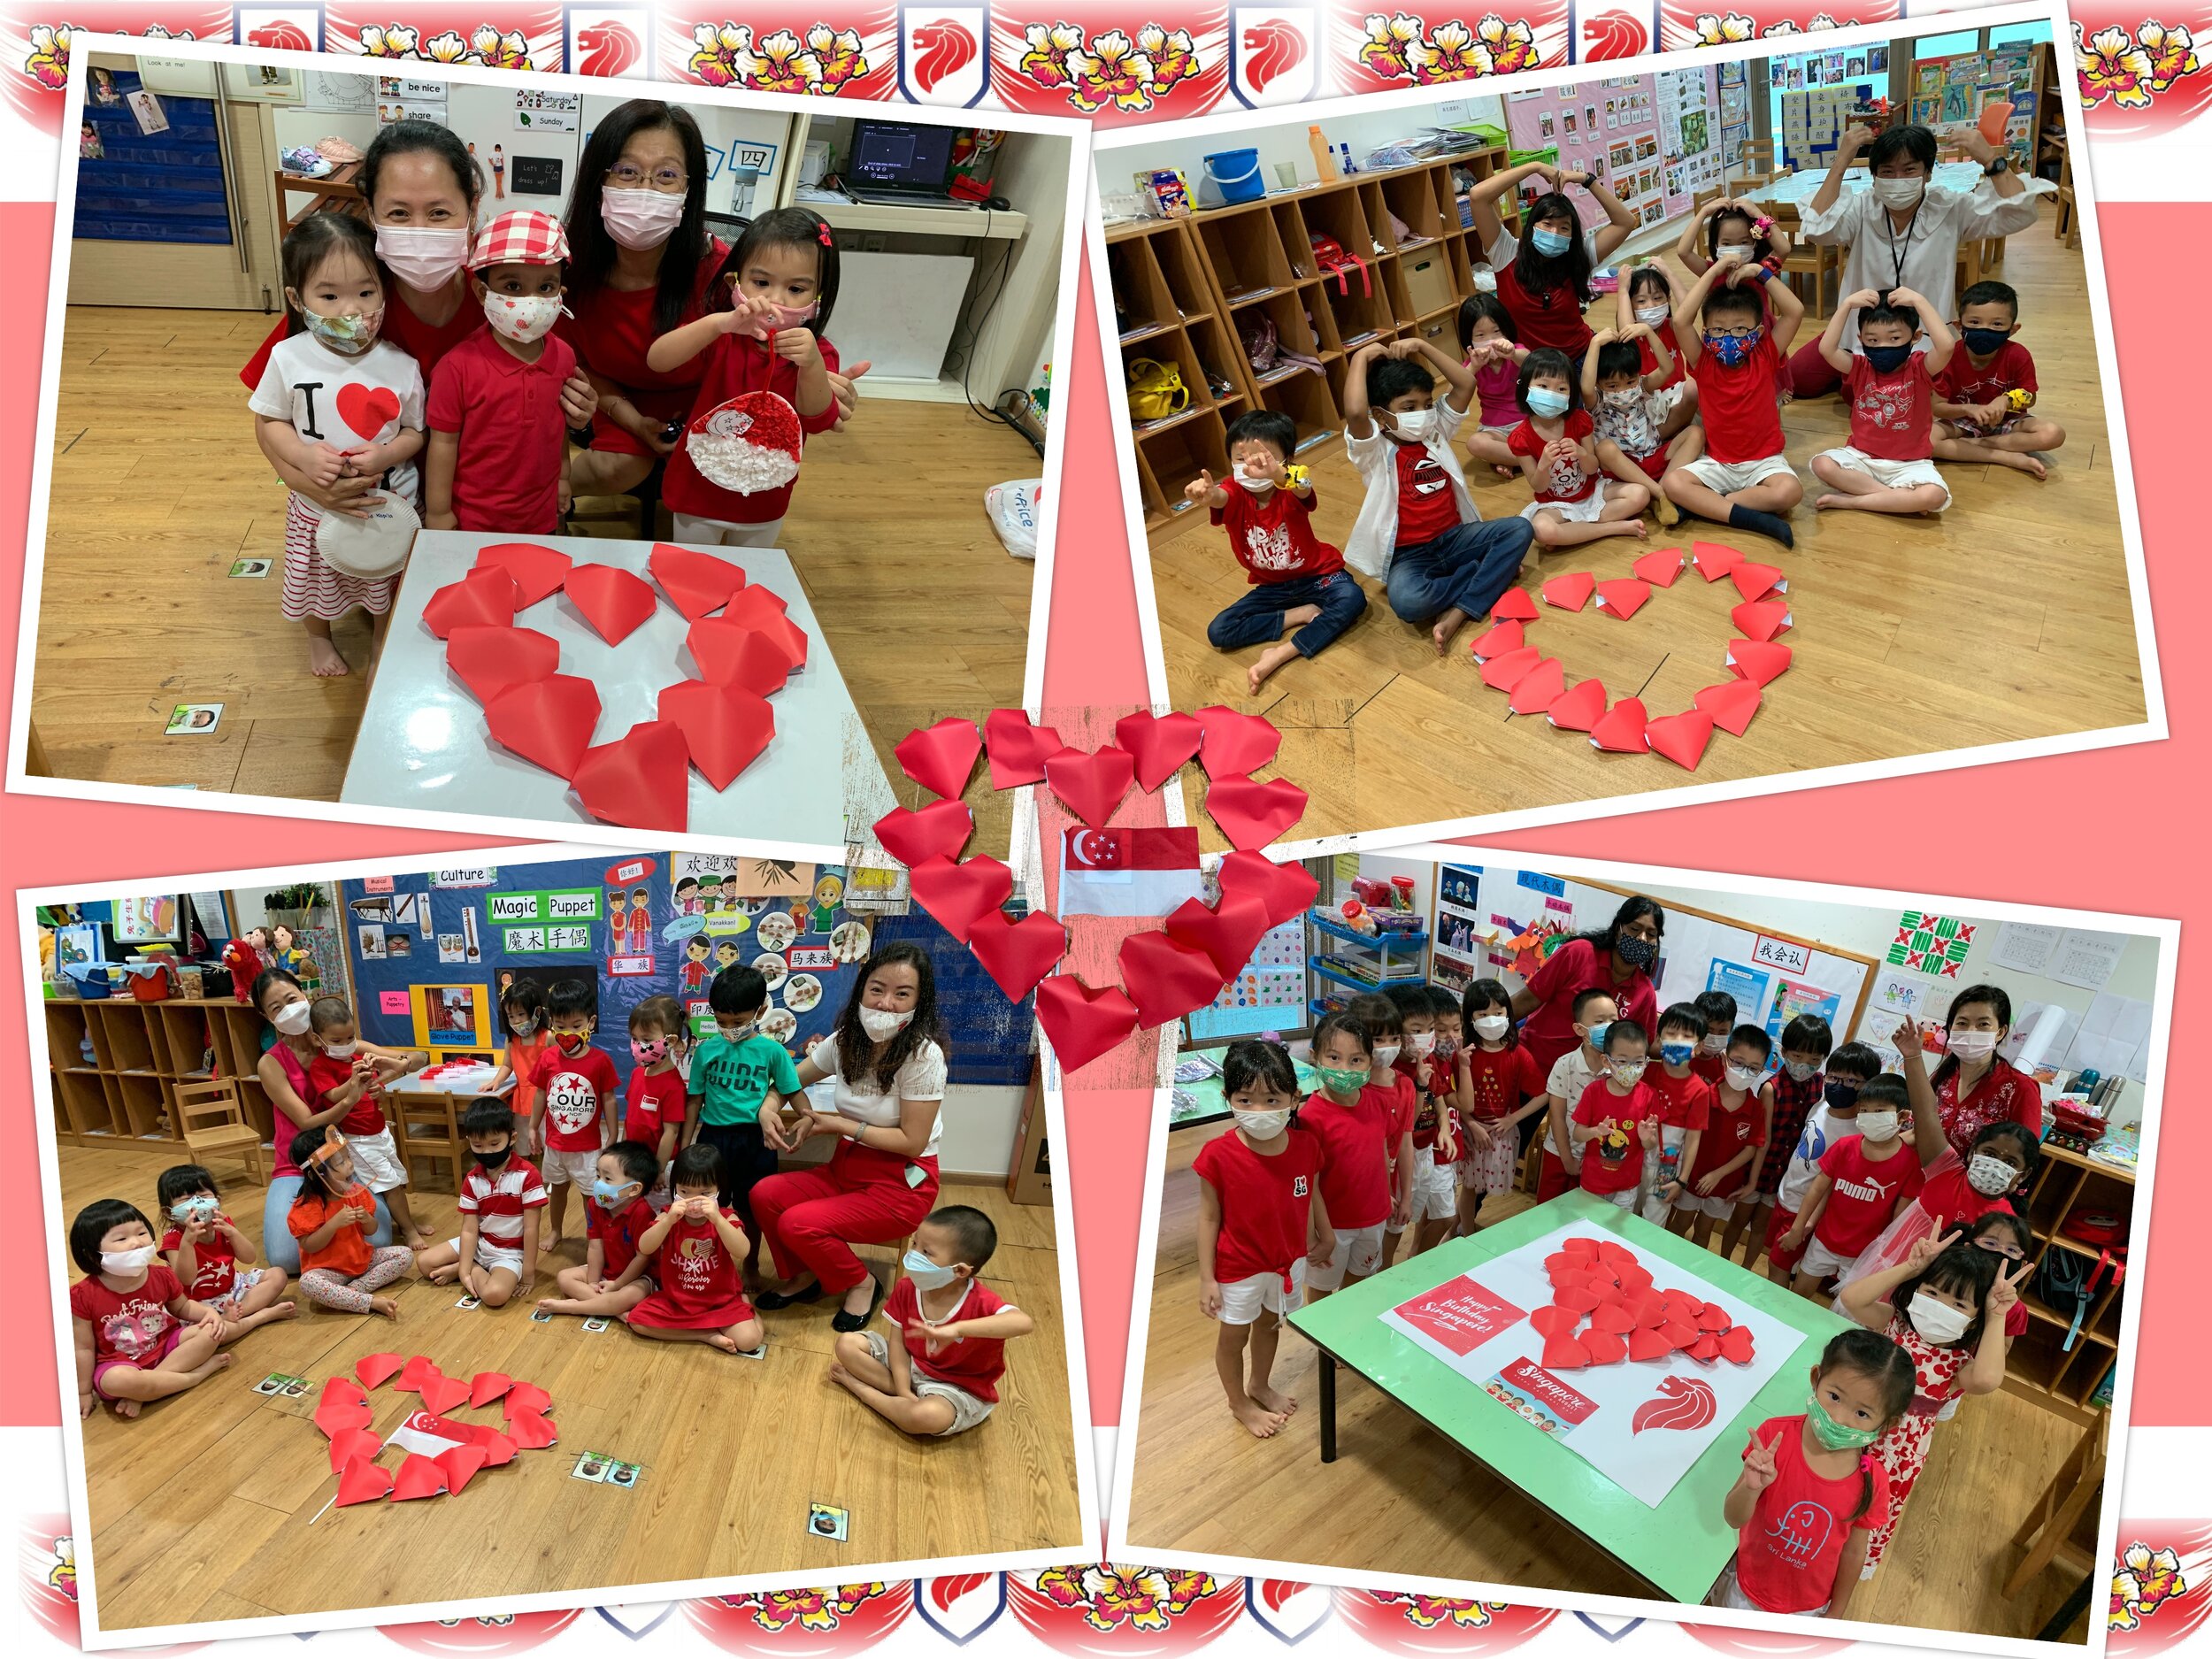  The  SINGAPORE's HEARTBEAT  - lovingly portrayed in various forms and sizes by ZBK's children   HAPPY 56th BIRTHDAY SINGAPORE!  